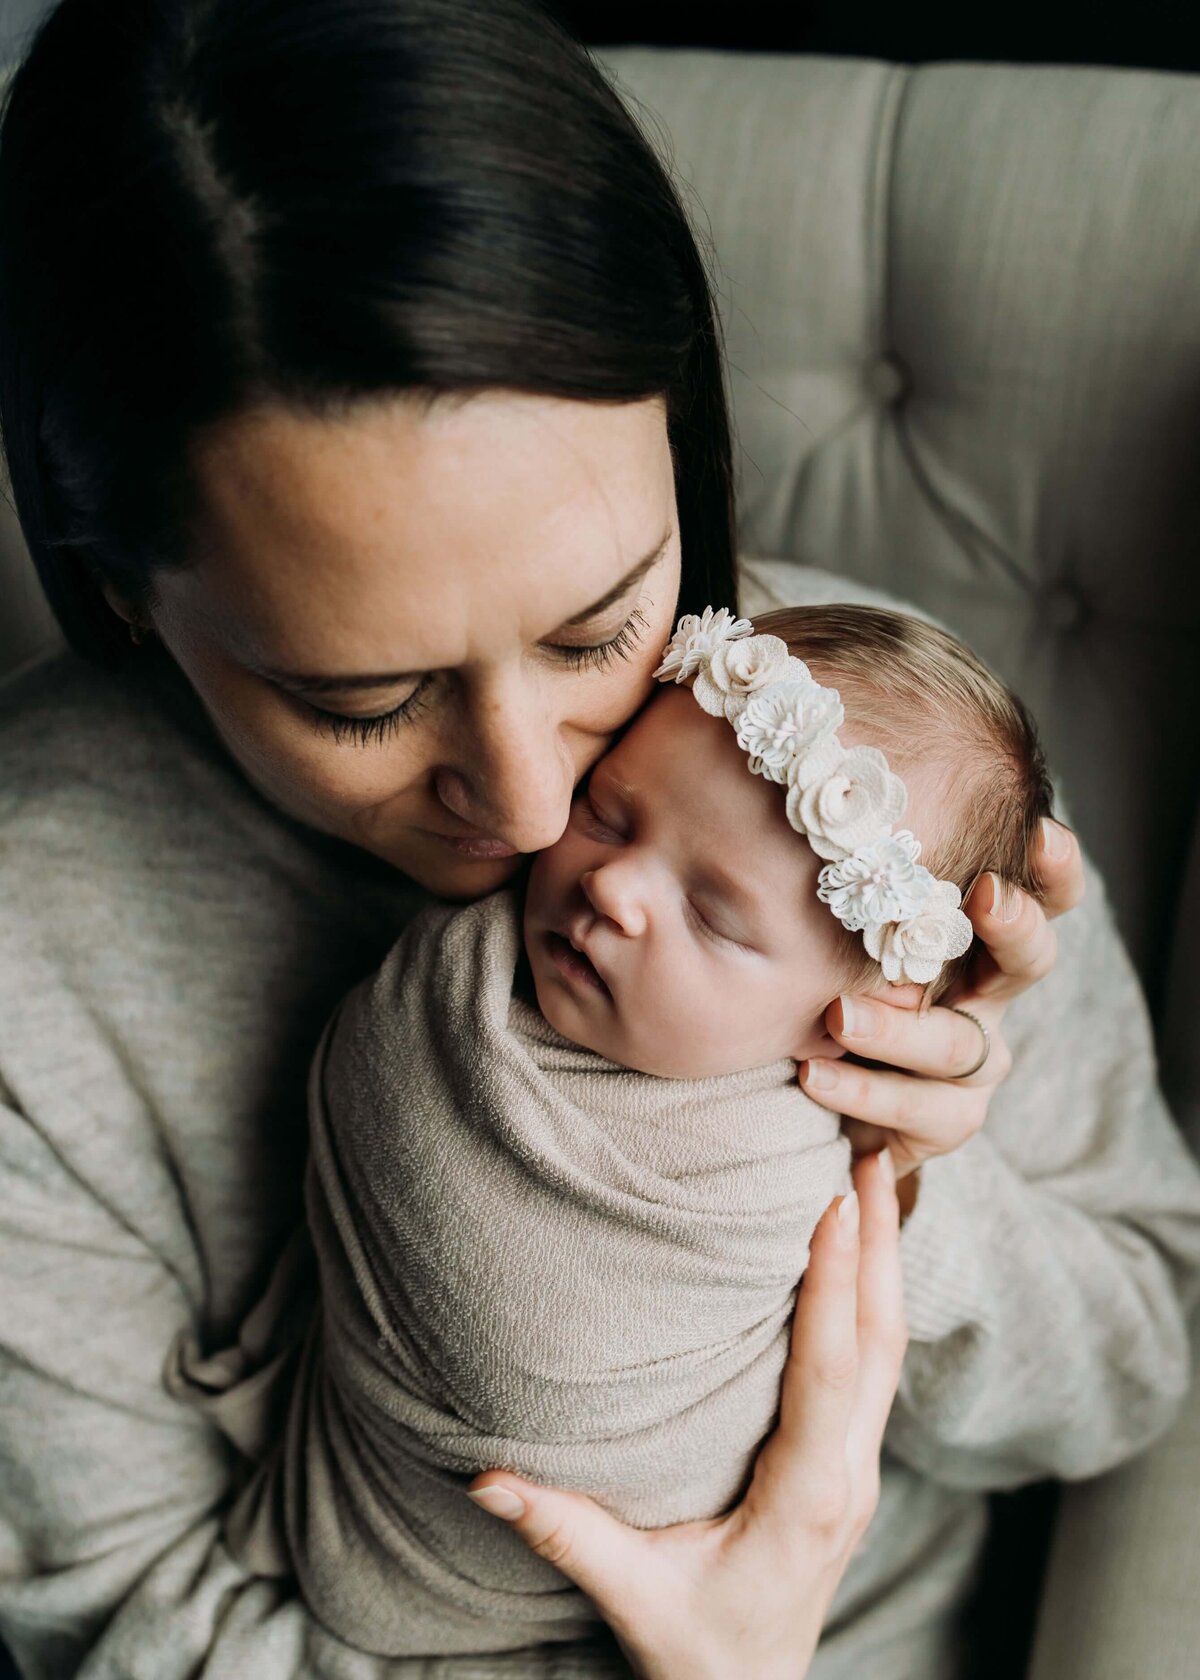 A woman, Pittsburgh newborn photographer, is holding a baby girl wrapped in a blanket.